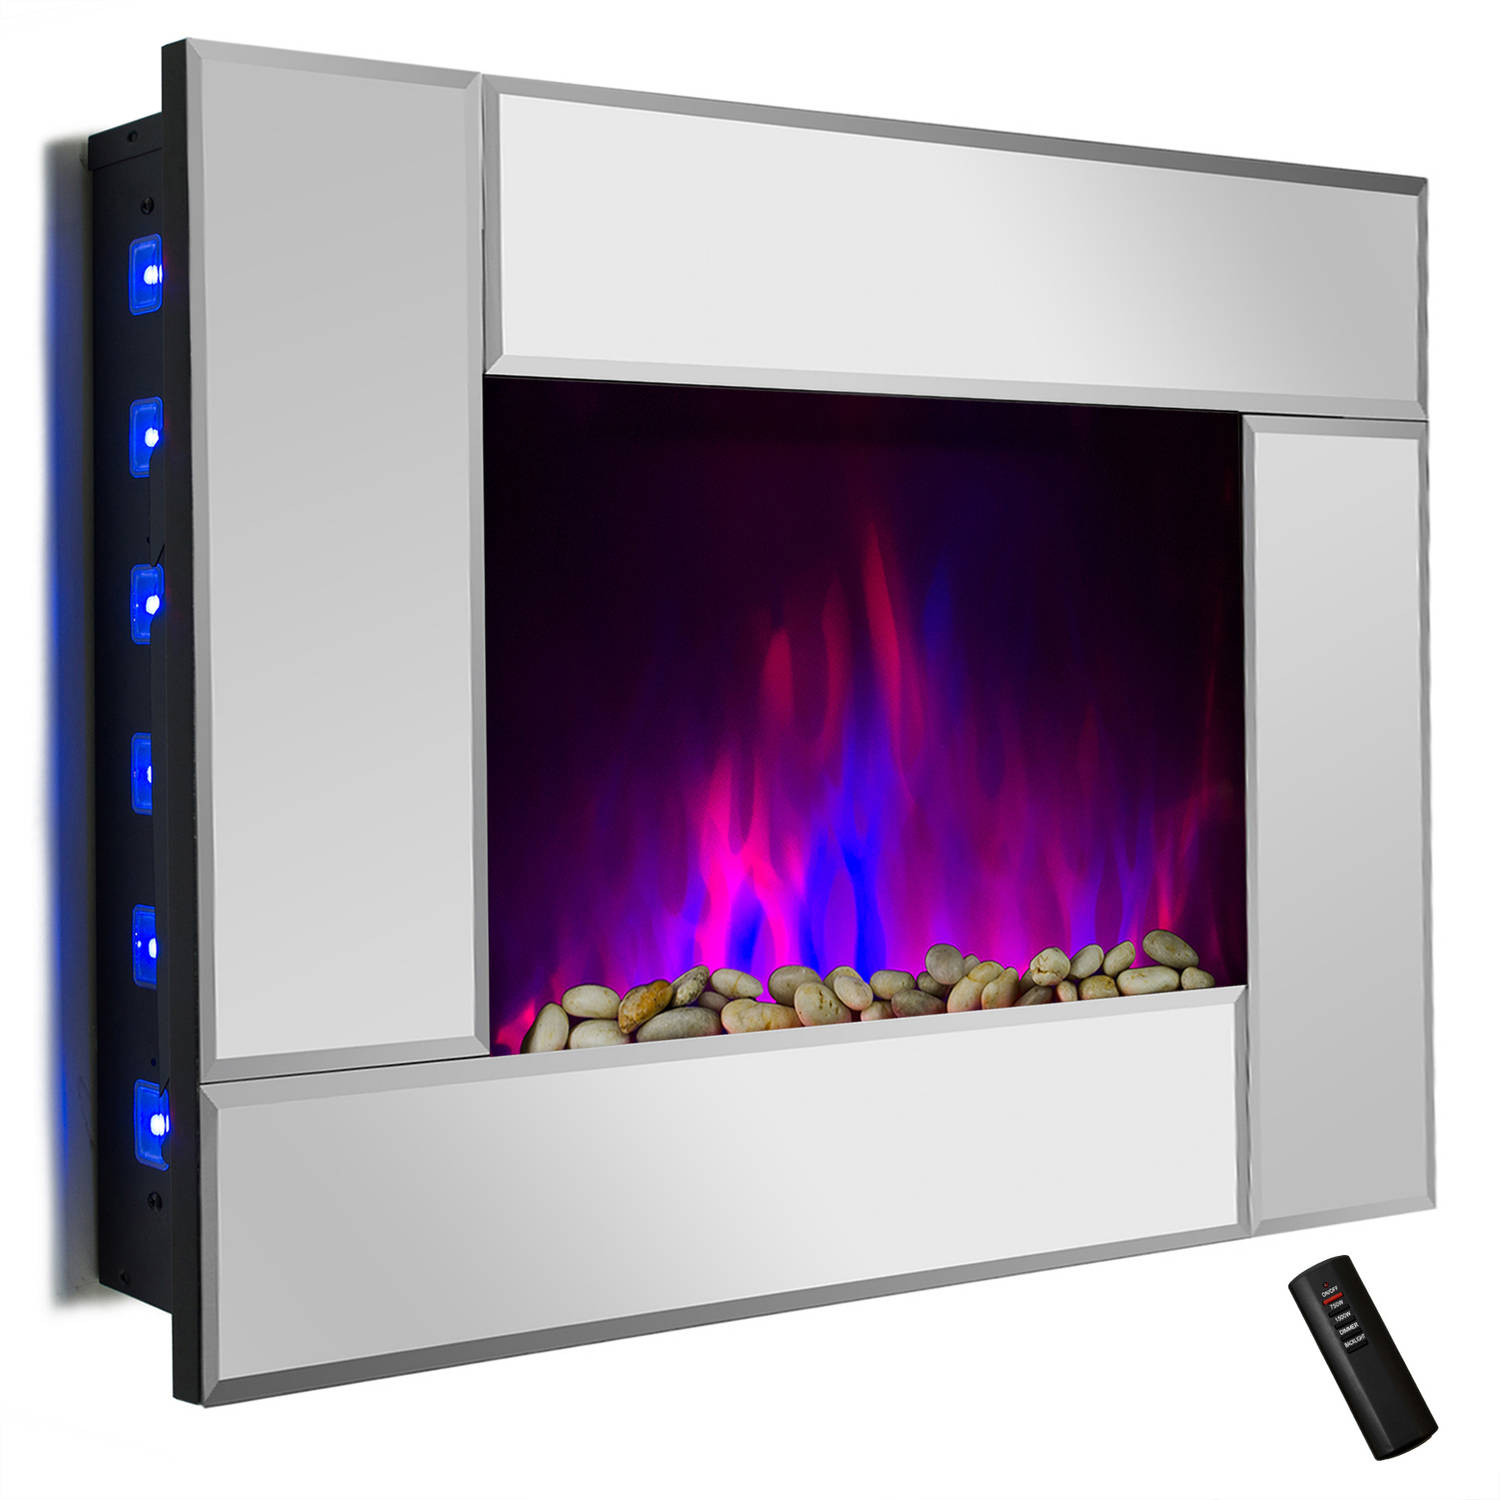 AKDY FP0050 36" 1500W Wall Mount Electric Fireplace Heater with Tempered Glass, Pebbles, Logs and Remote Control, Mirror - image 1 of 14